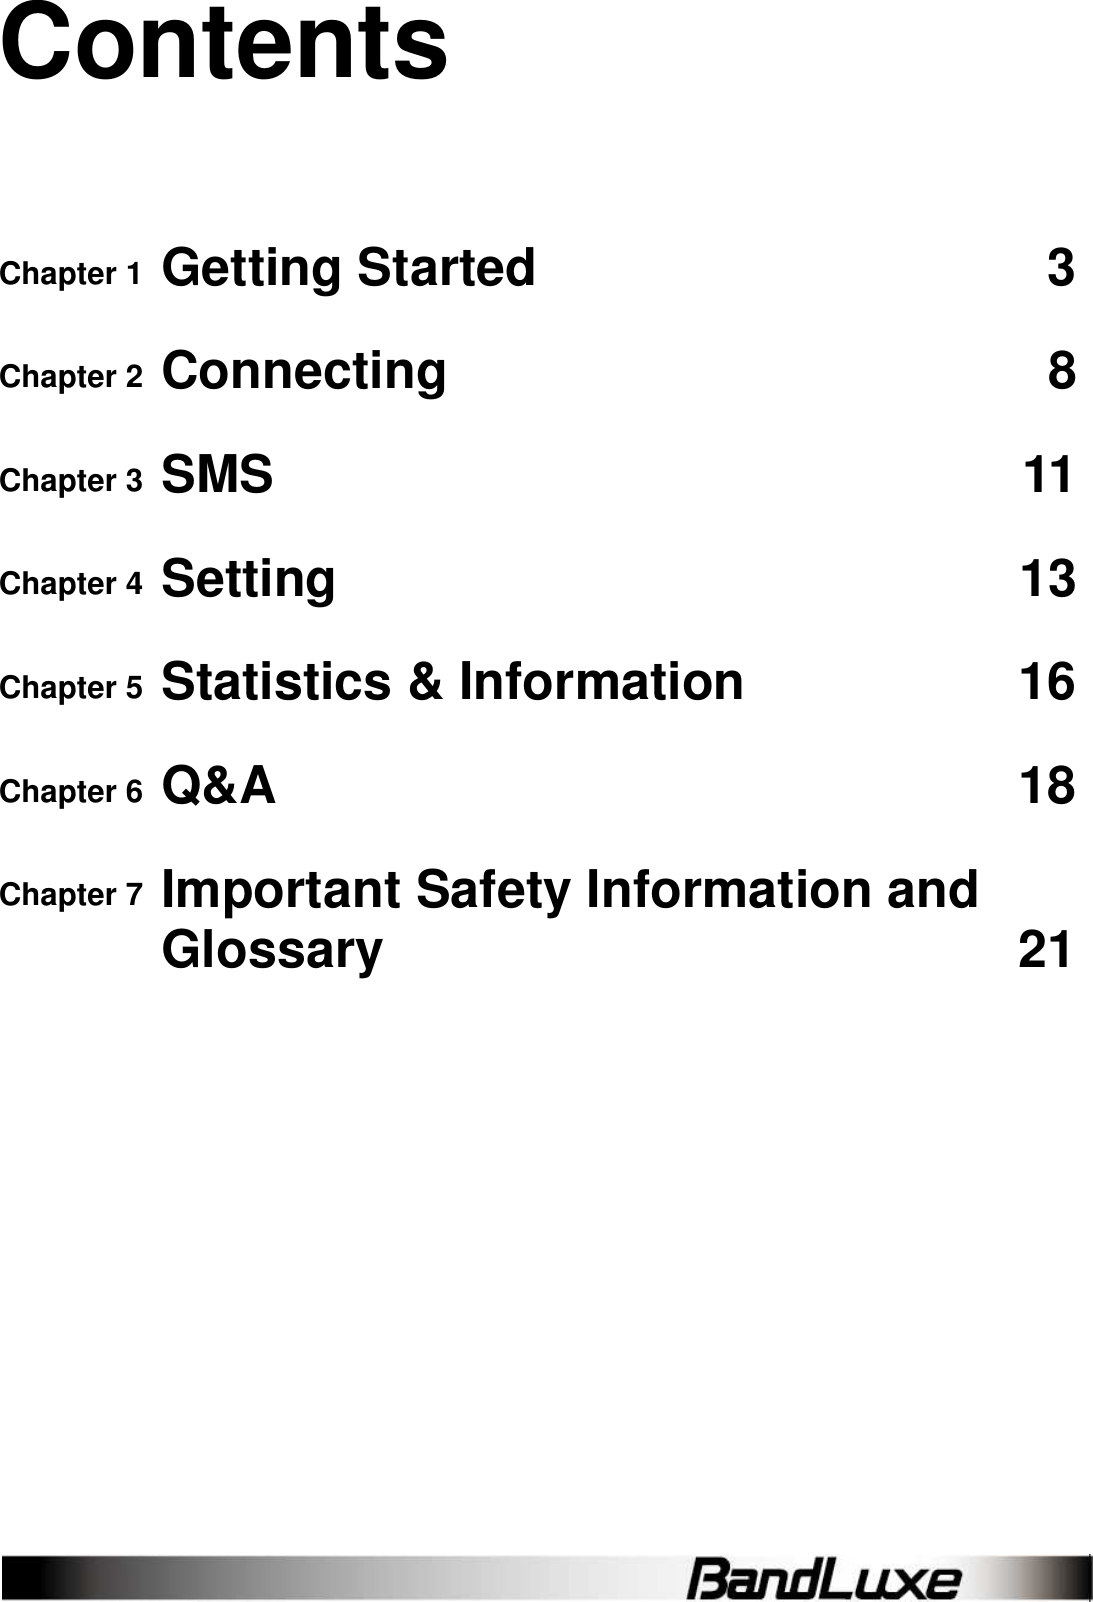  Contents Chapter 1 Getting Started  3 Chapter 2 Connecting  8 Chapter 3 SMS  11 Chapter 4 Setting  13 Chapter 5 Statistics &amp; Information  16 Chapter 6 Q&amp;A  18 Chapter 7 Important Safety Information and Glossary  21  